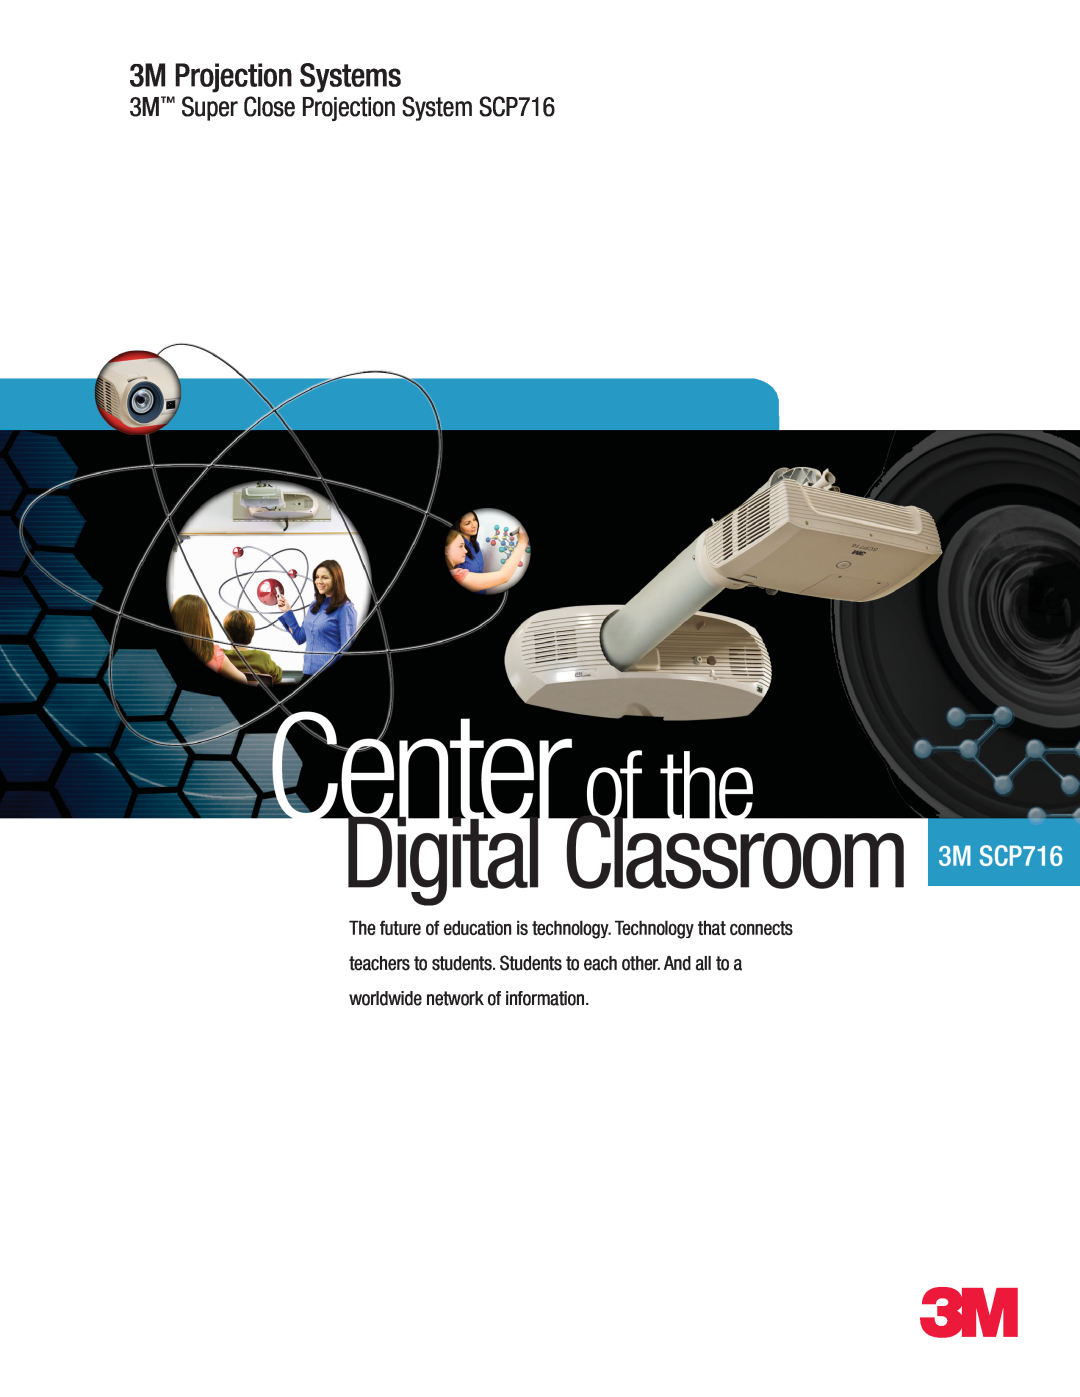 3M manual Centerof the, Digital Classroom 3M SCP716, 3M Projection Systems, 3M Super Close Projection System SCP716 